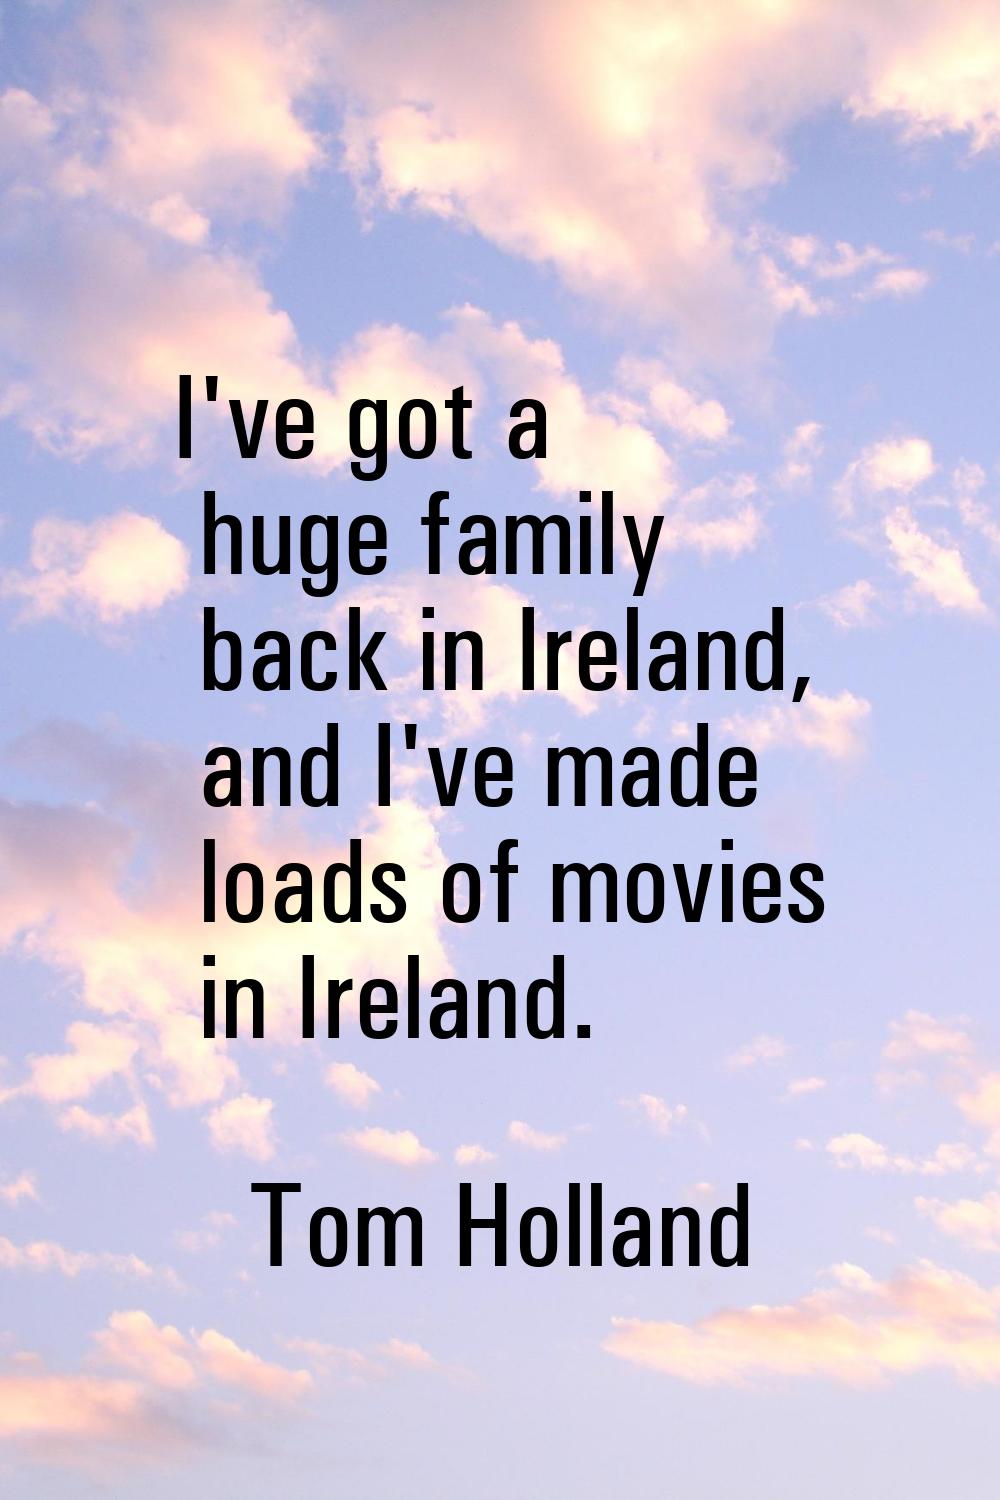 I've got a huge family back in Ireland, and I've made loads of movies in Ireland.